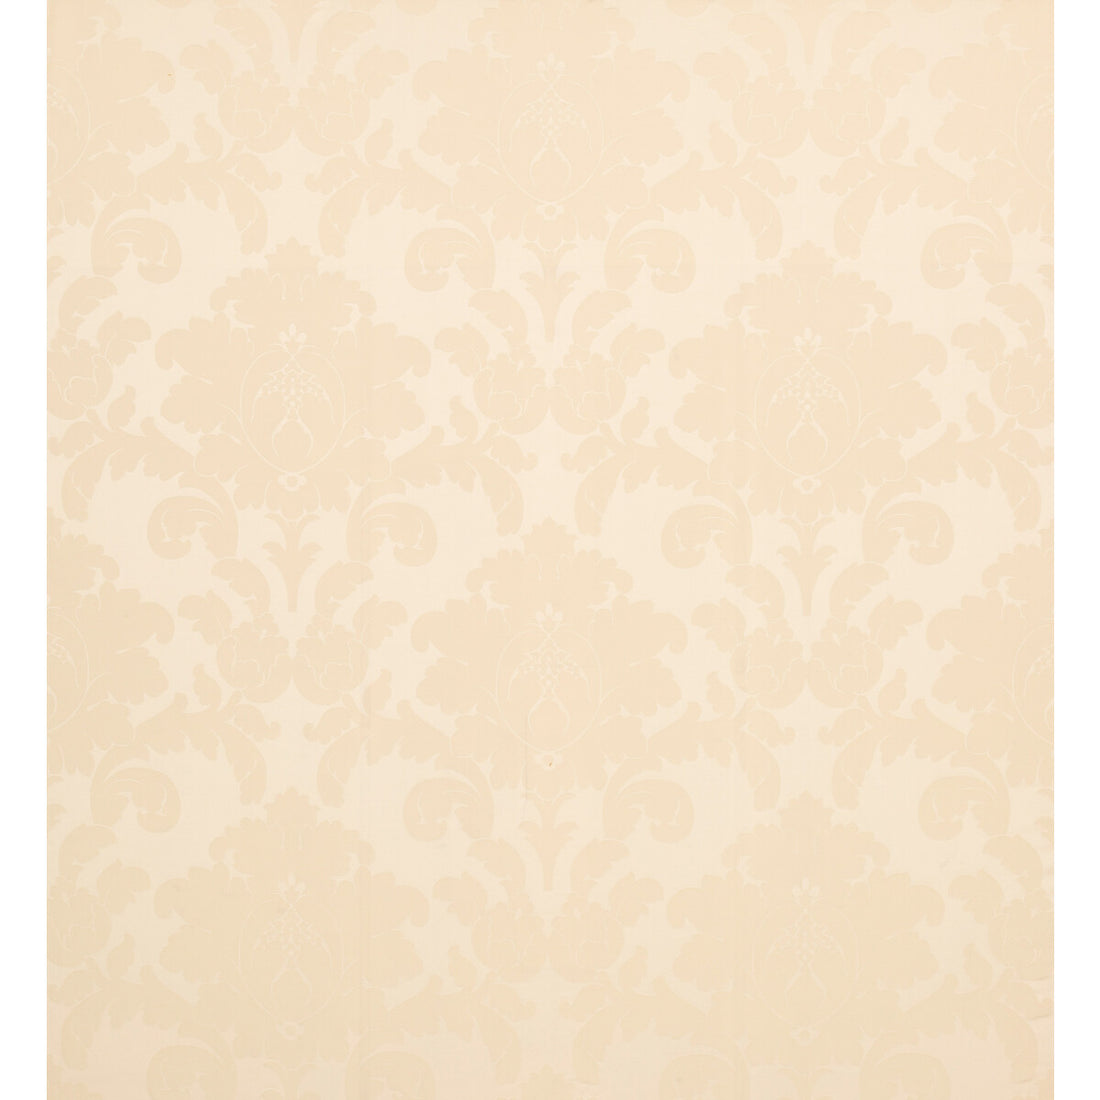 Sylvana fabric in ivory color - pattern 8014117.1.0 - by Brunschwig &amp; Fils in the Maisonnette collection